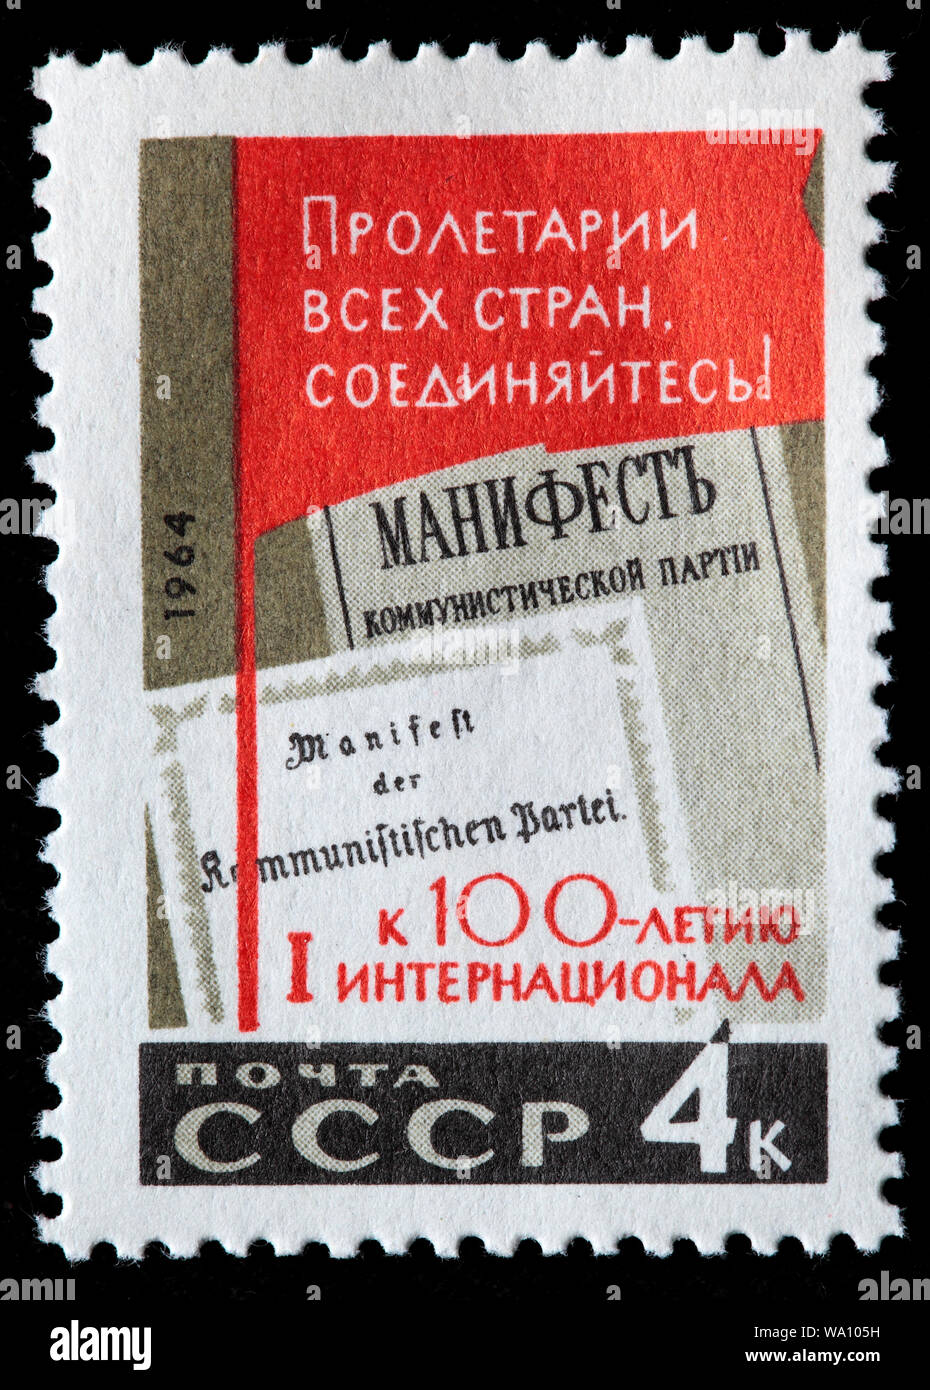 Communist party manifesto, Centenary of First International, postage stamp, Russia, USSR, 1964 Stock Photo